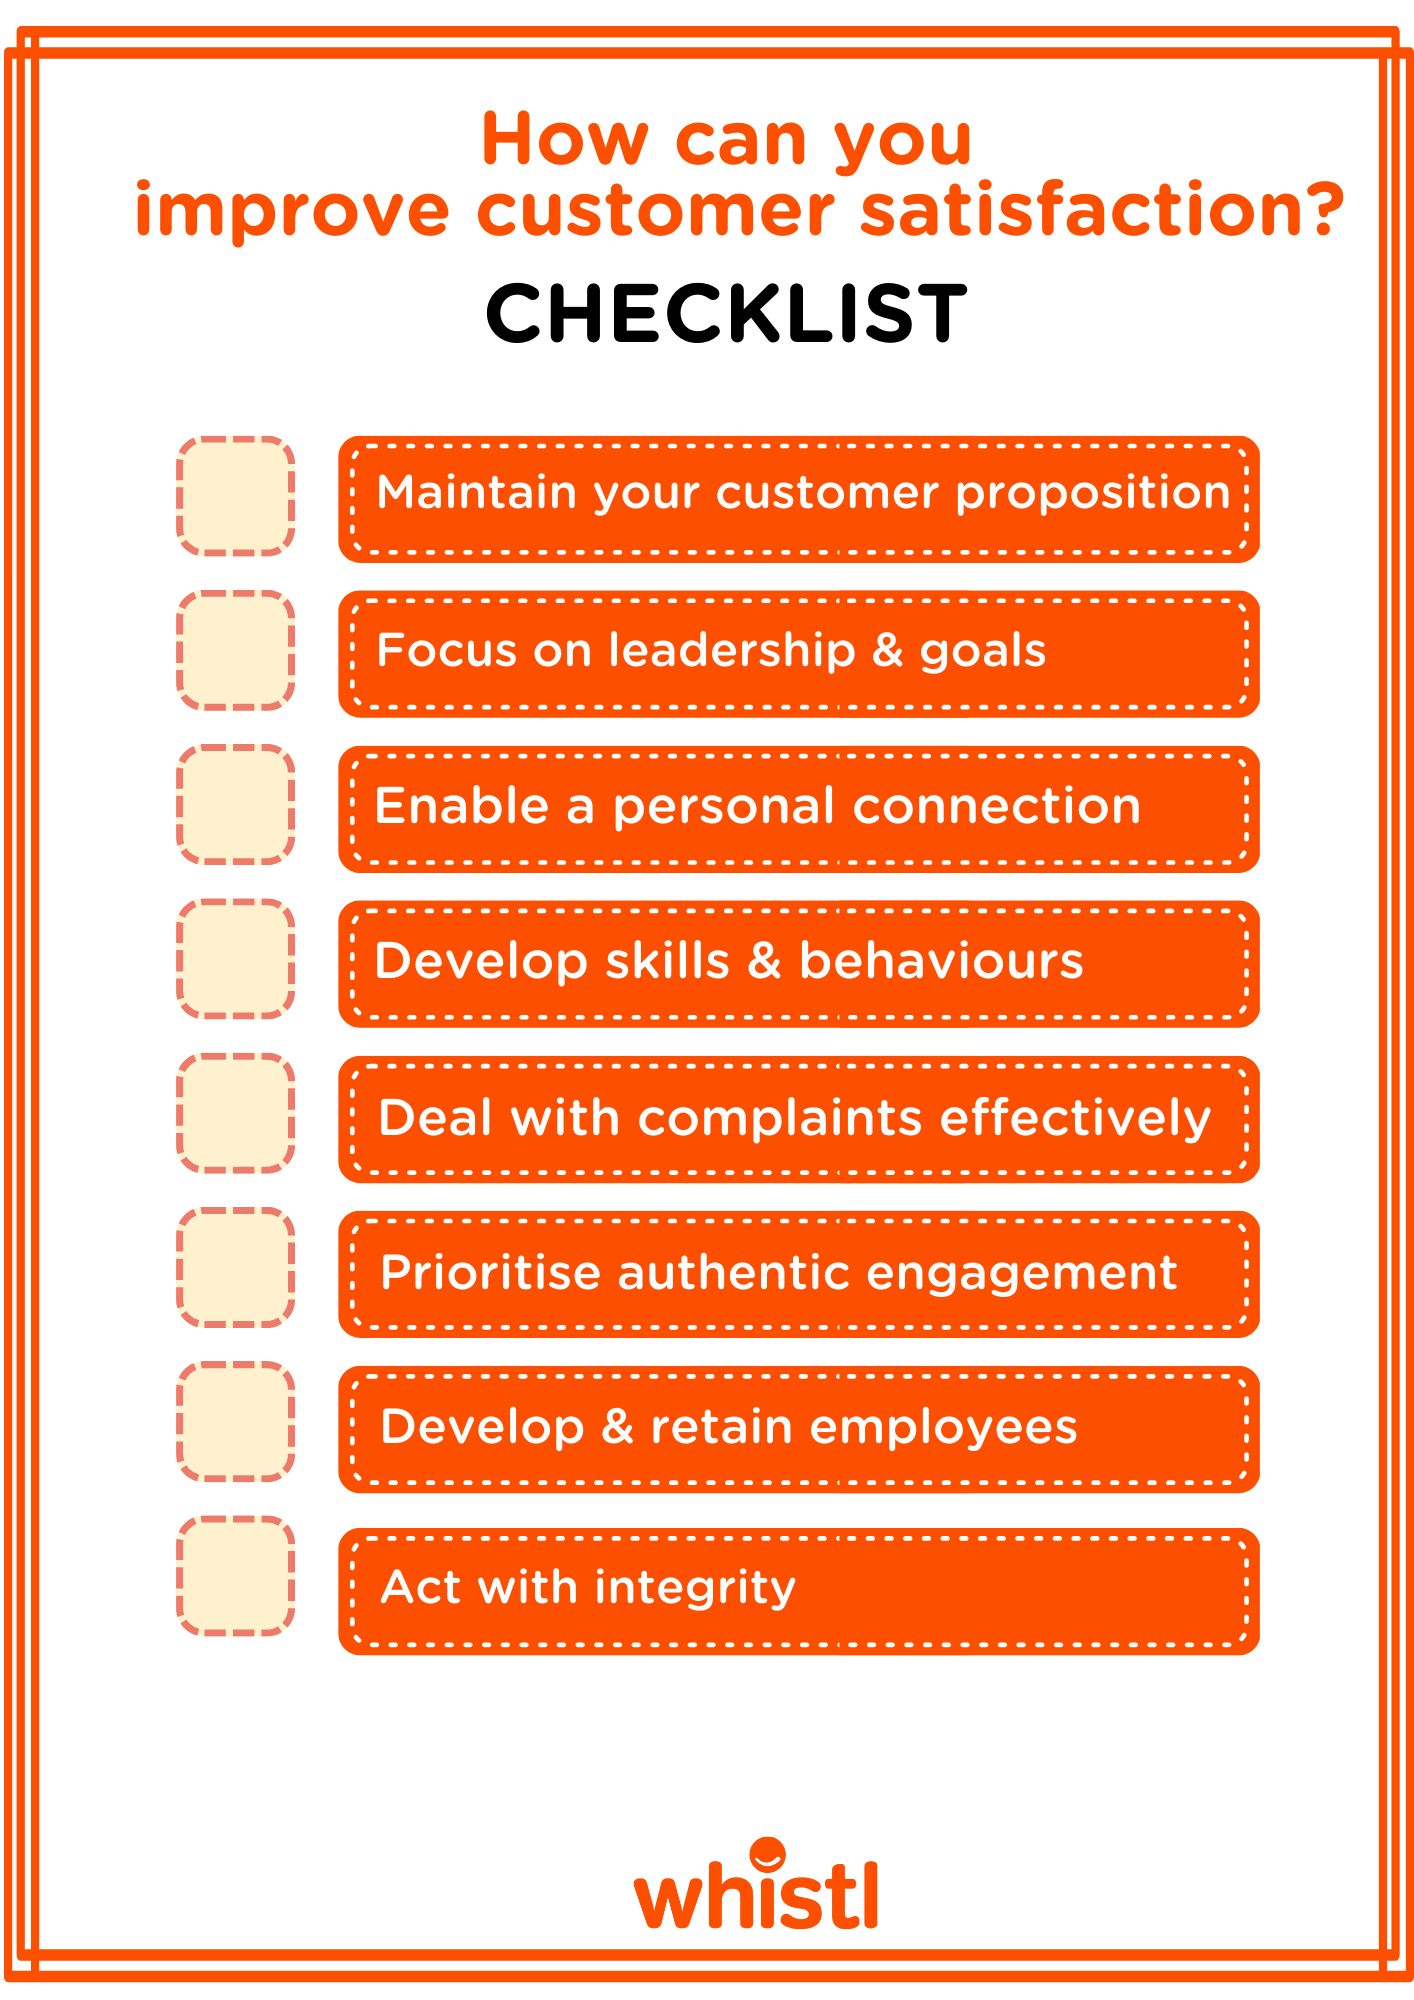 CS - how to improve customer satisfaction checklist.png